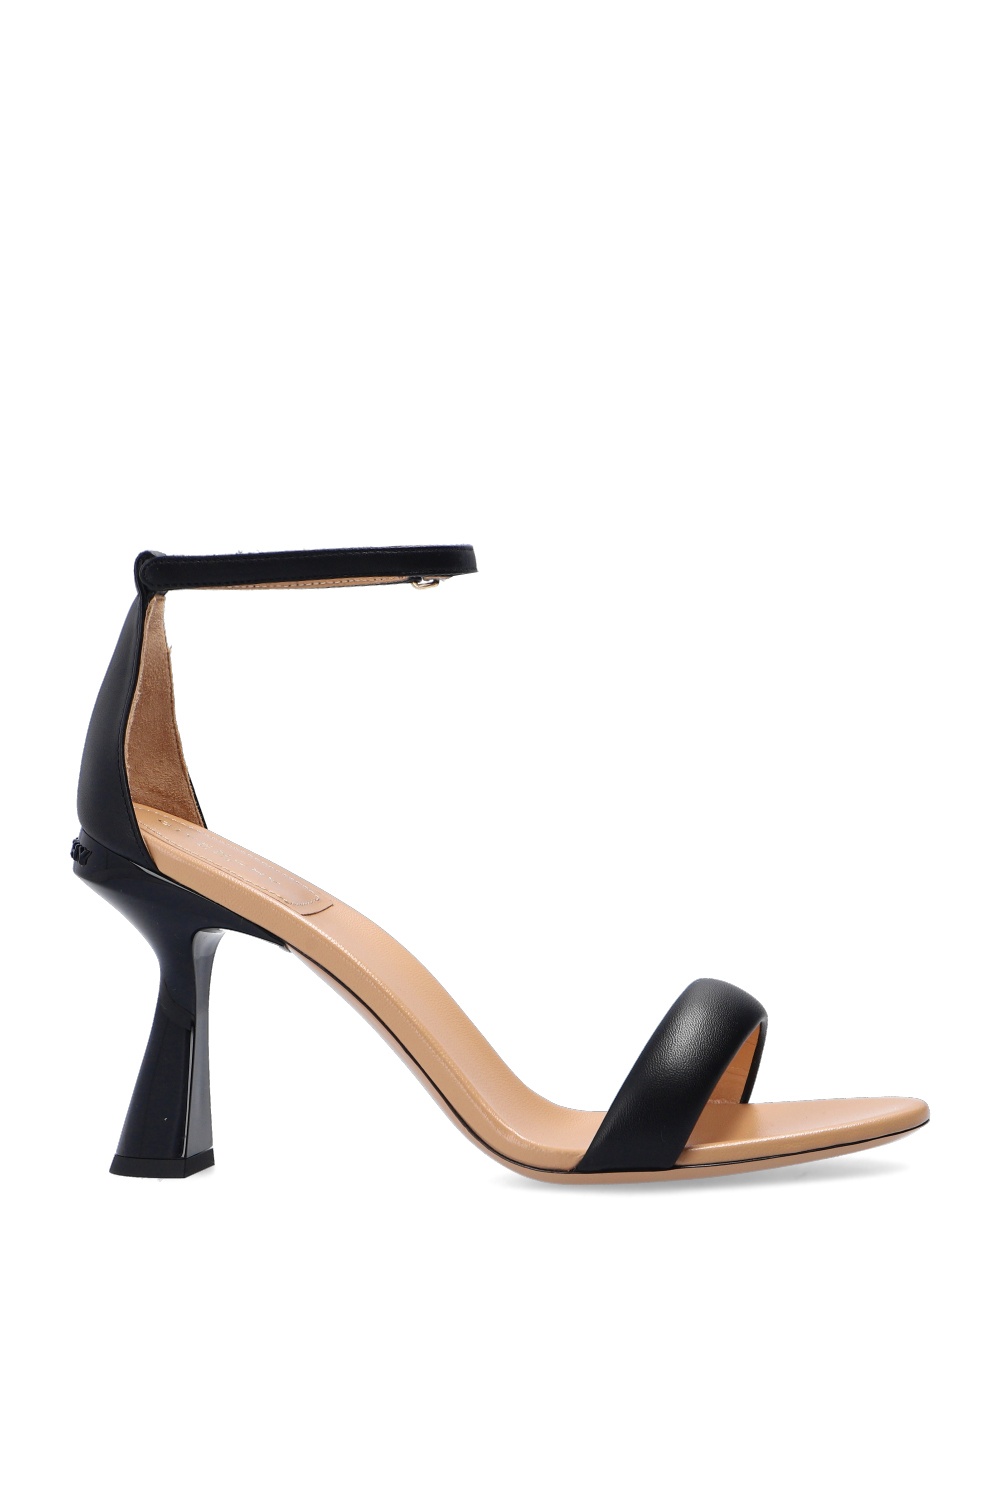 givenchy high heel sandals